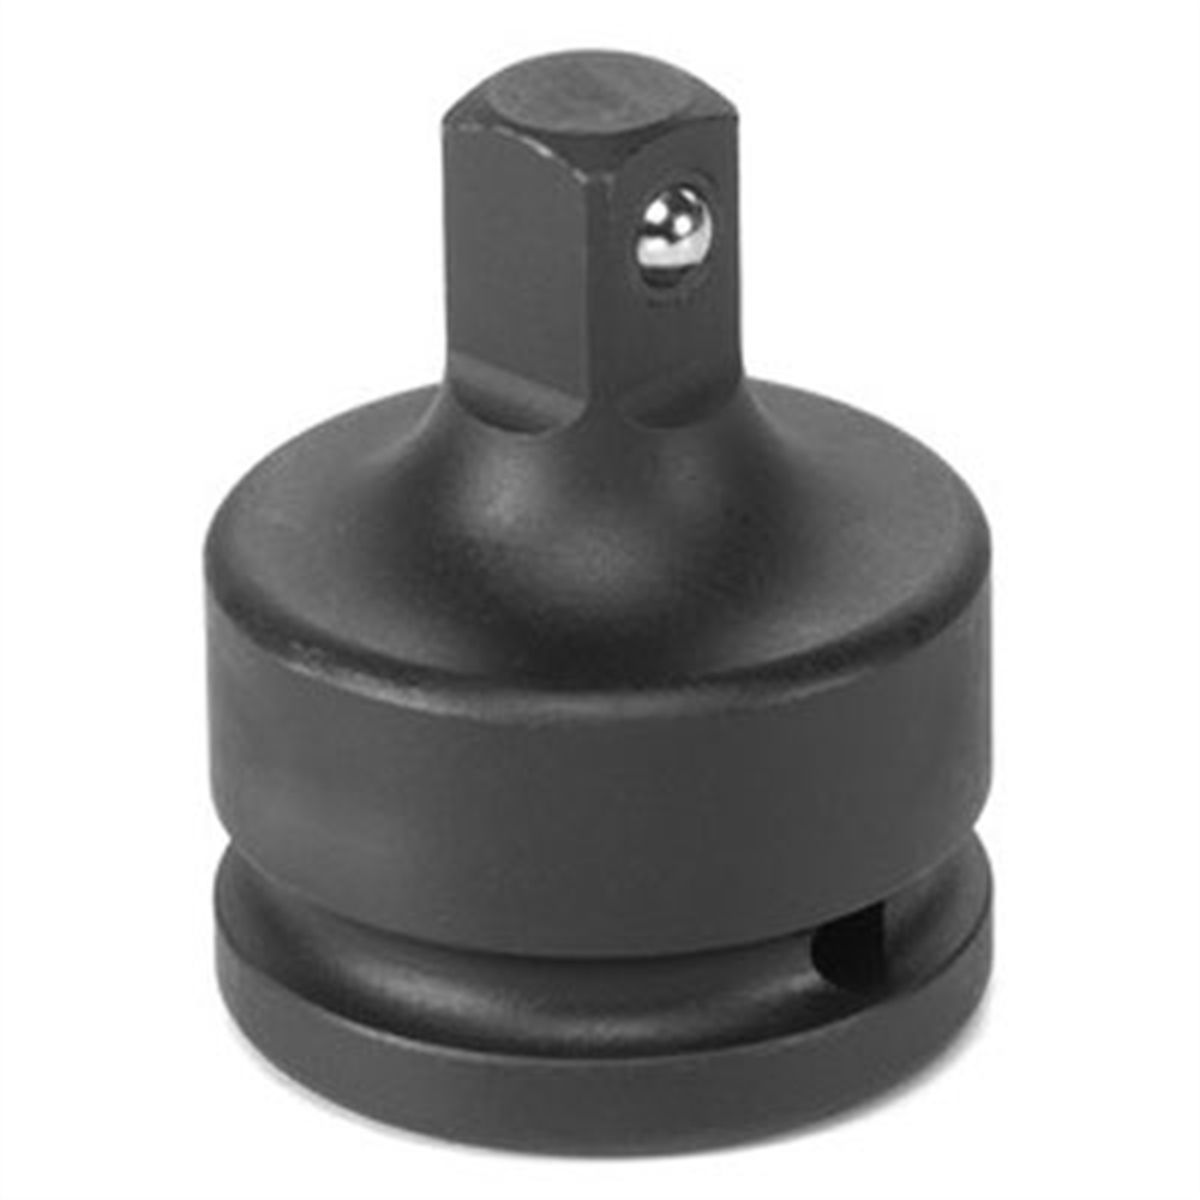 3/4" Female x 1/2" Male Adapter with Locking Pin